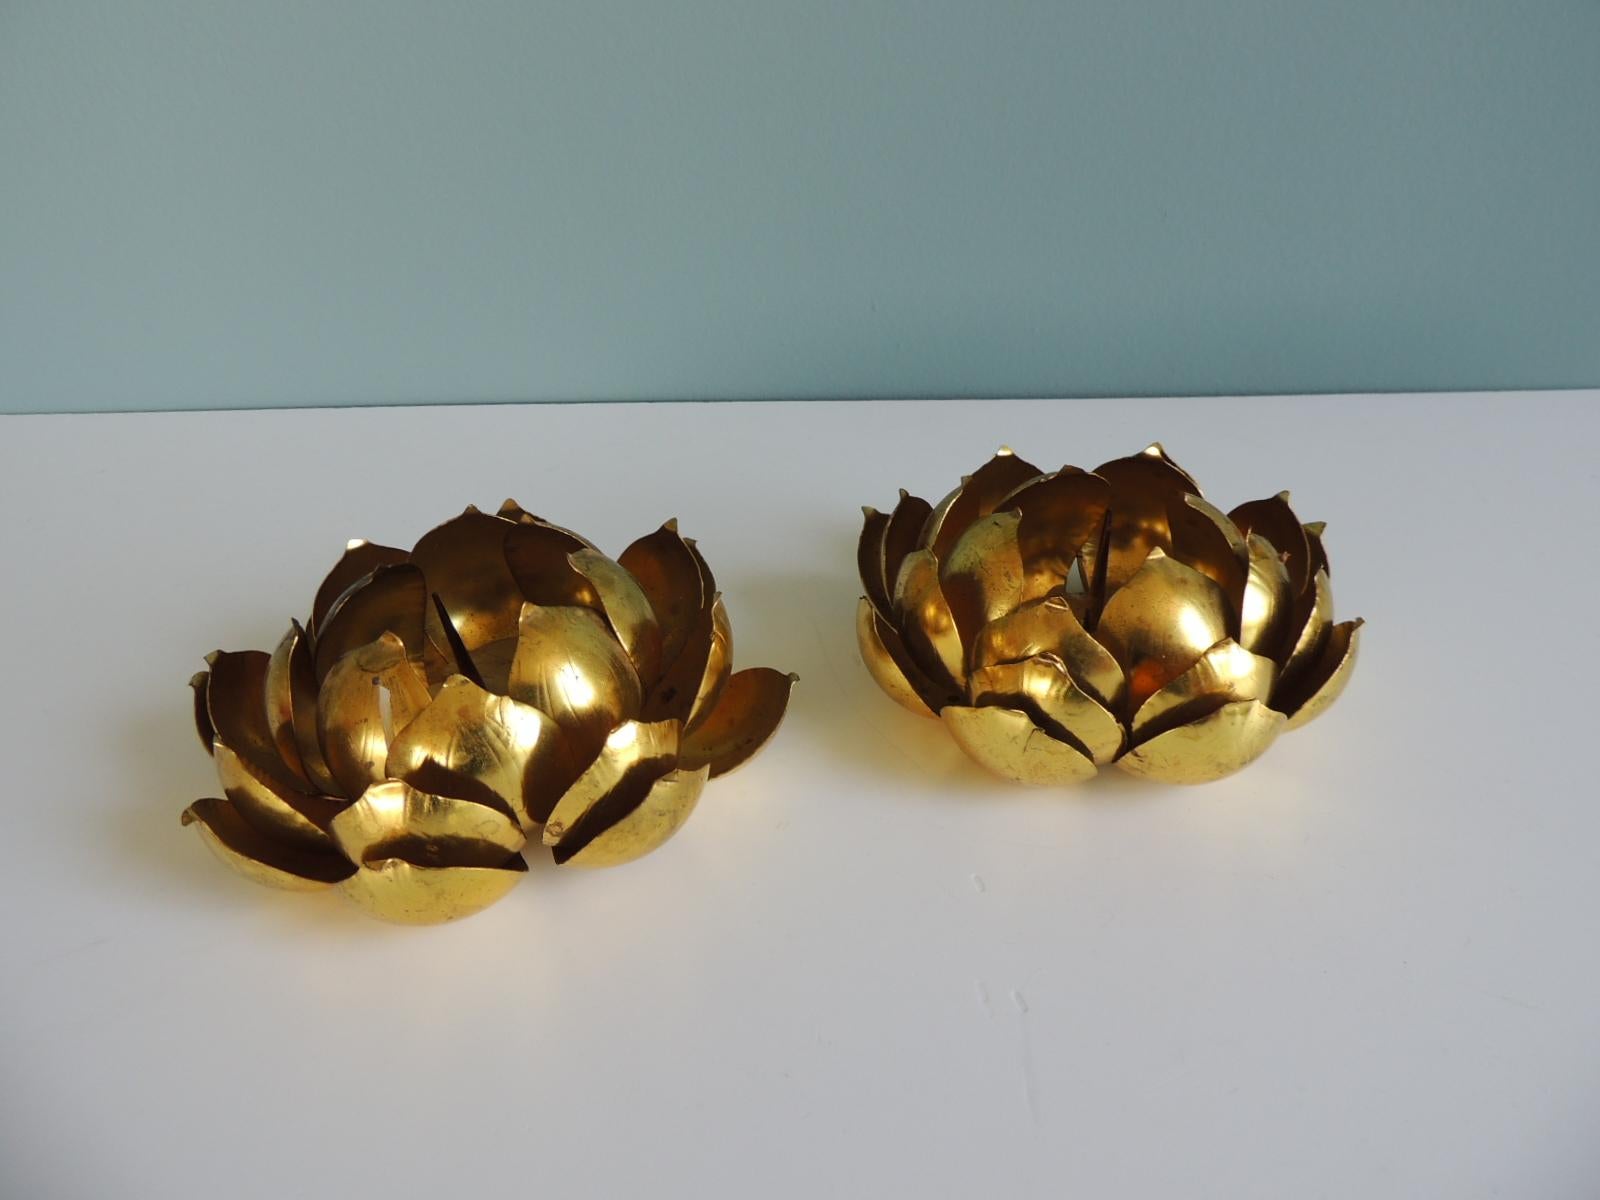 Pair of brass Mid-Century Modern lotus flowers candle holders.
Size: 6